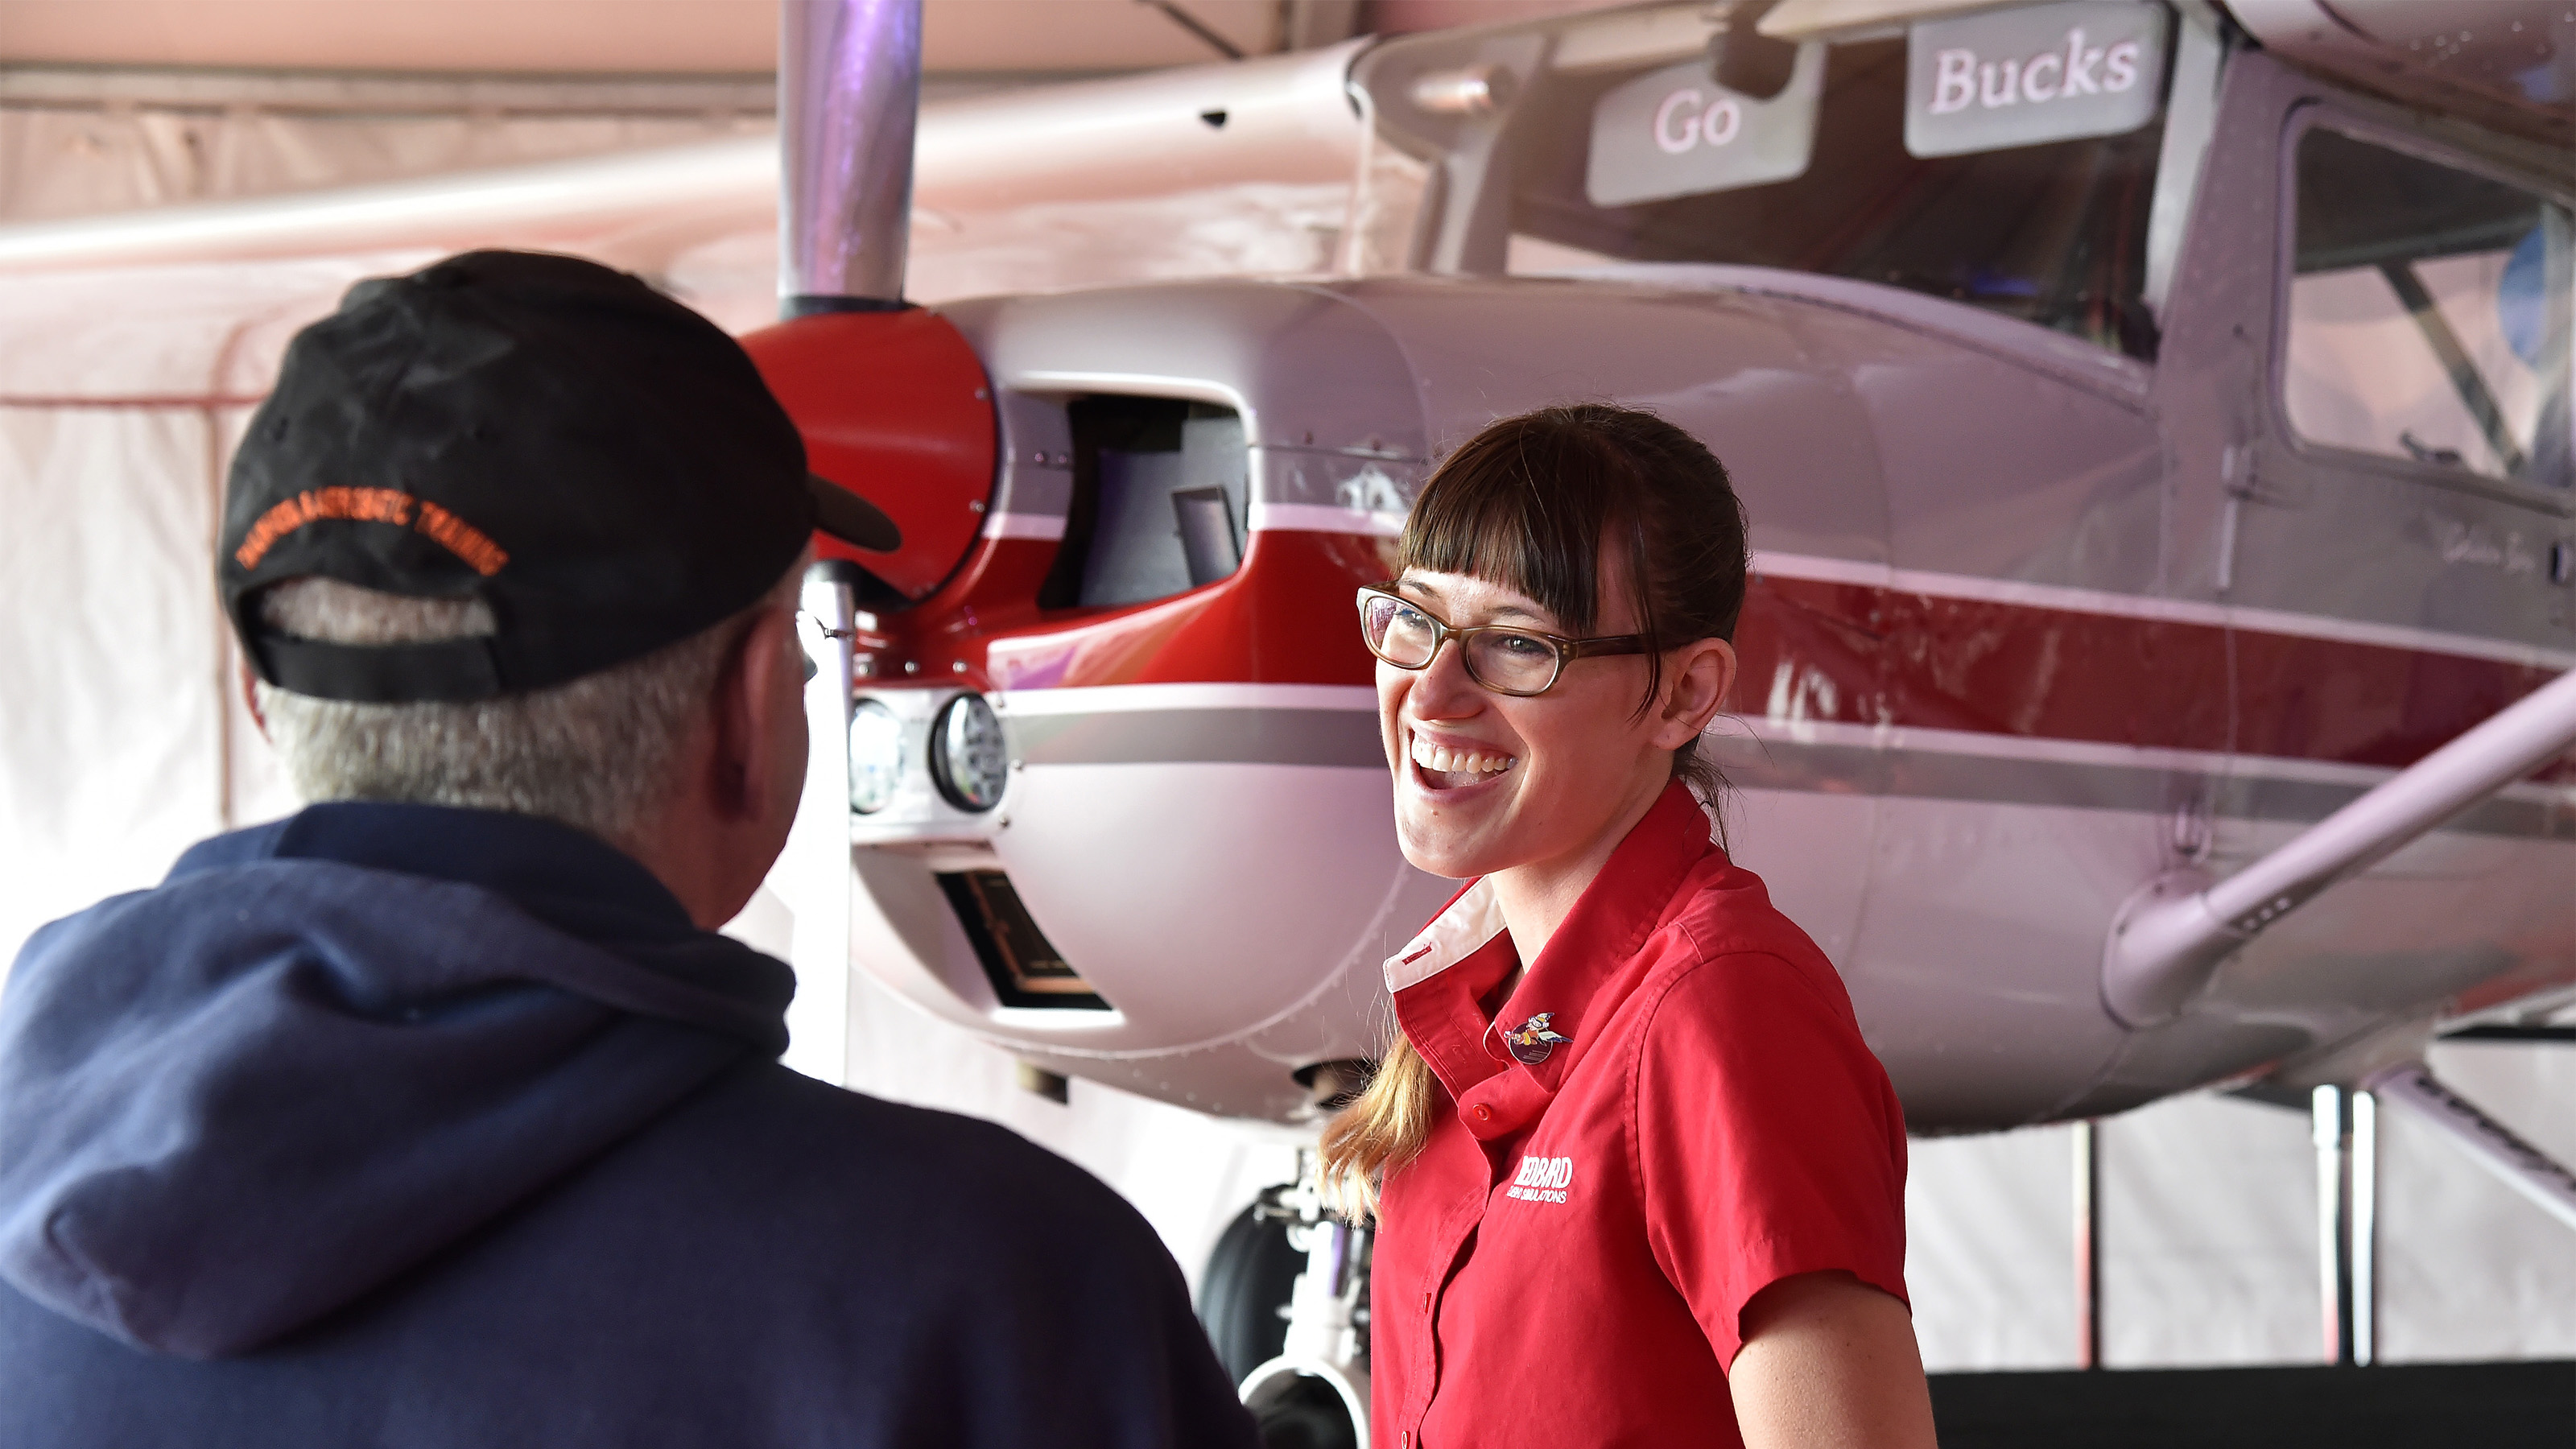 Redbird's Brittney Miculka will guide more than 100 flight instructors, educators, and flight school managers through Redbird Flight Simulations' annual Migration conference in Texas. Photo by David Tulis.